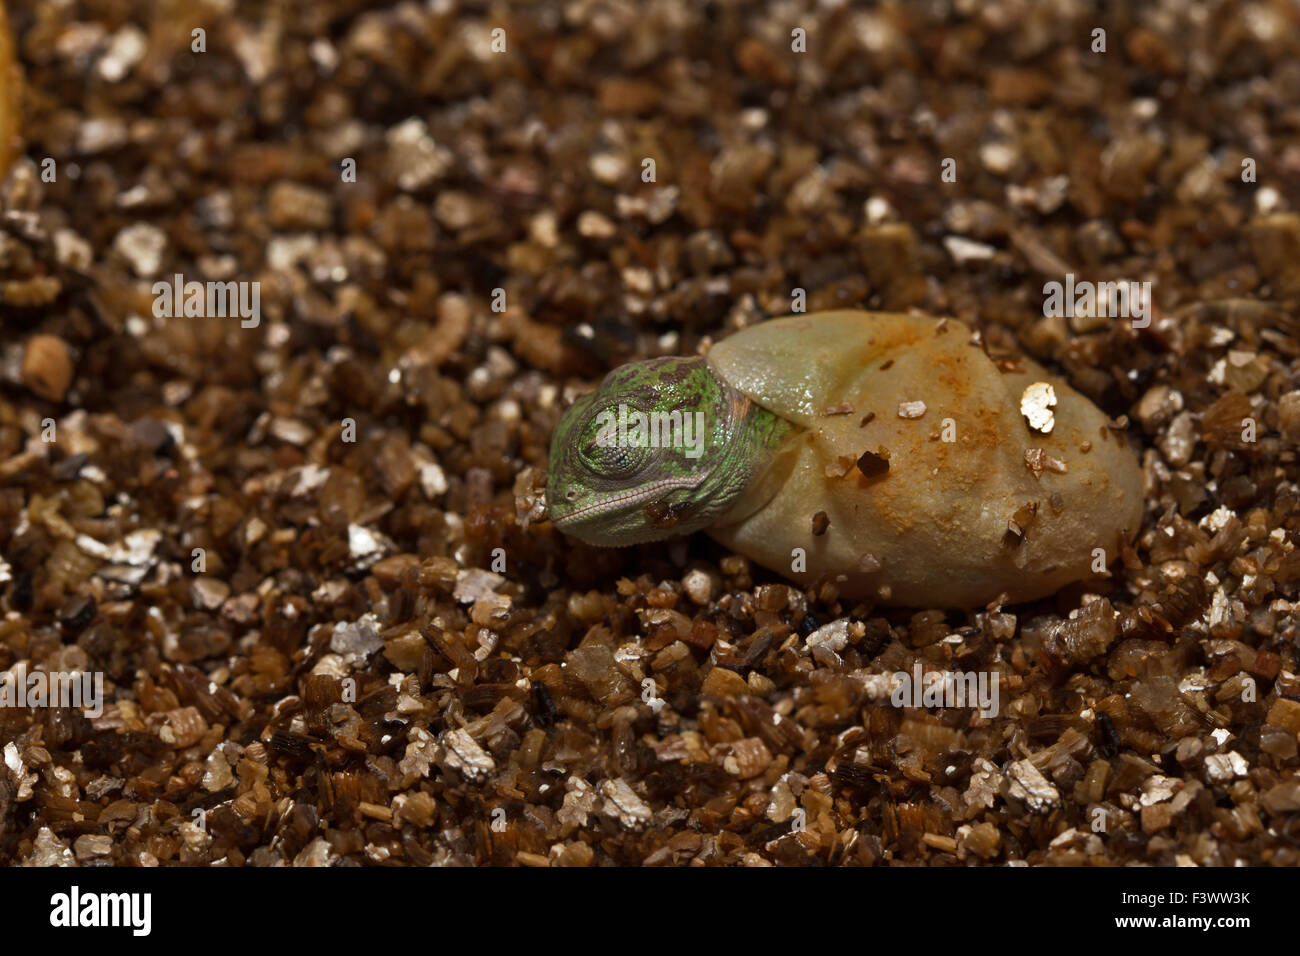 young chameleon hatching from an egg Stock Photo